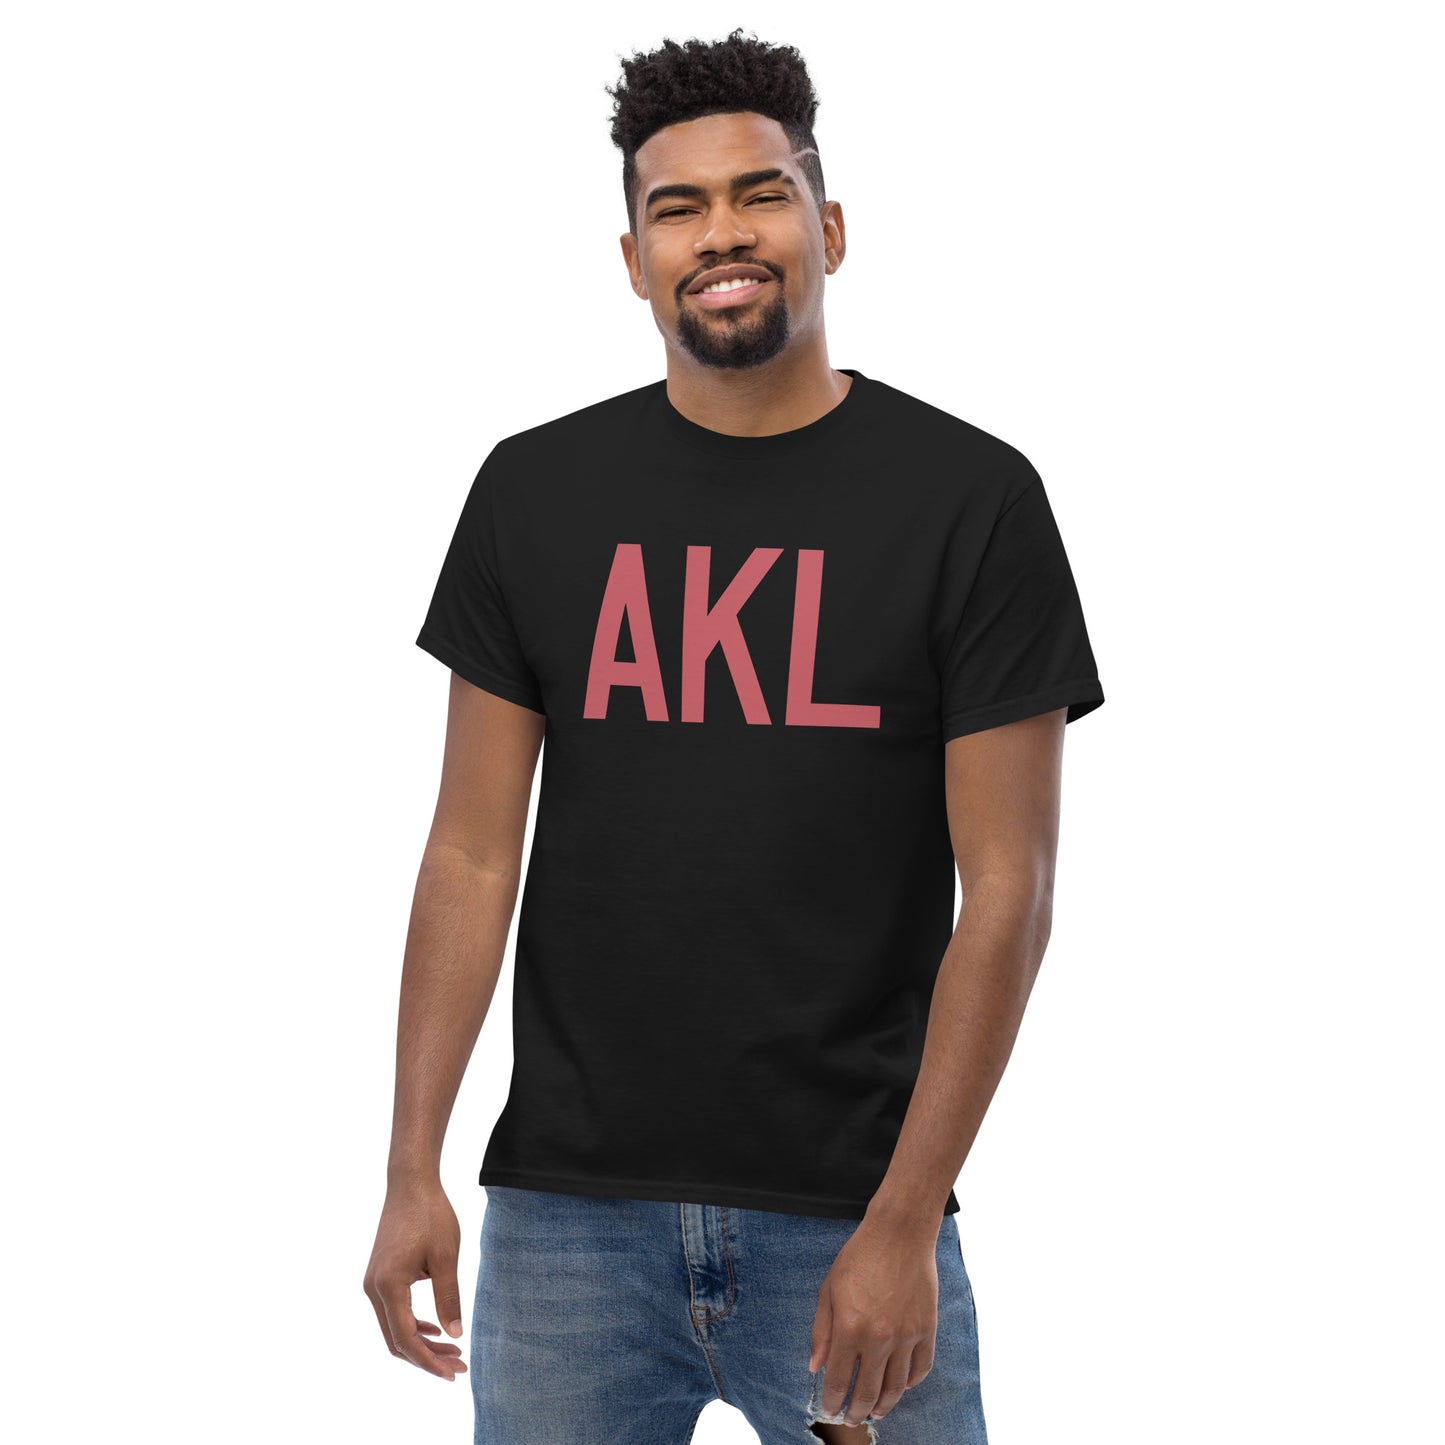 Aviation Enthusiast Men's Tee - Deep Pink Graphic • AKL Auckland • YHM Designs - Image 06